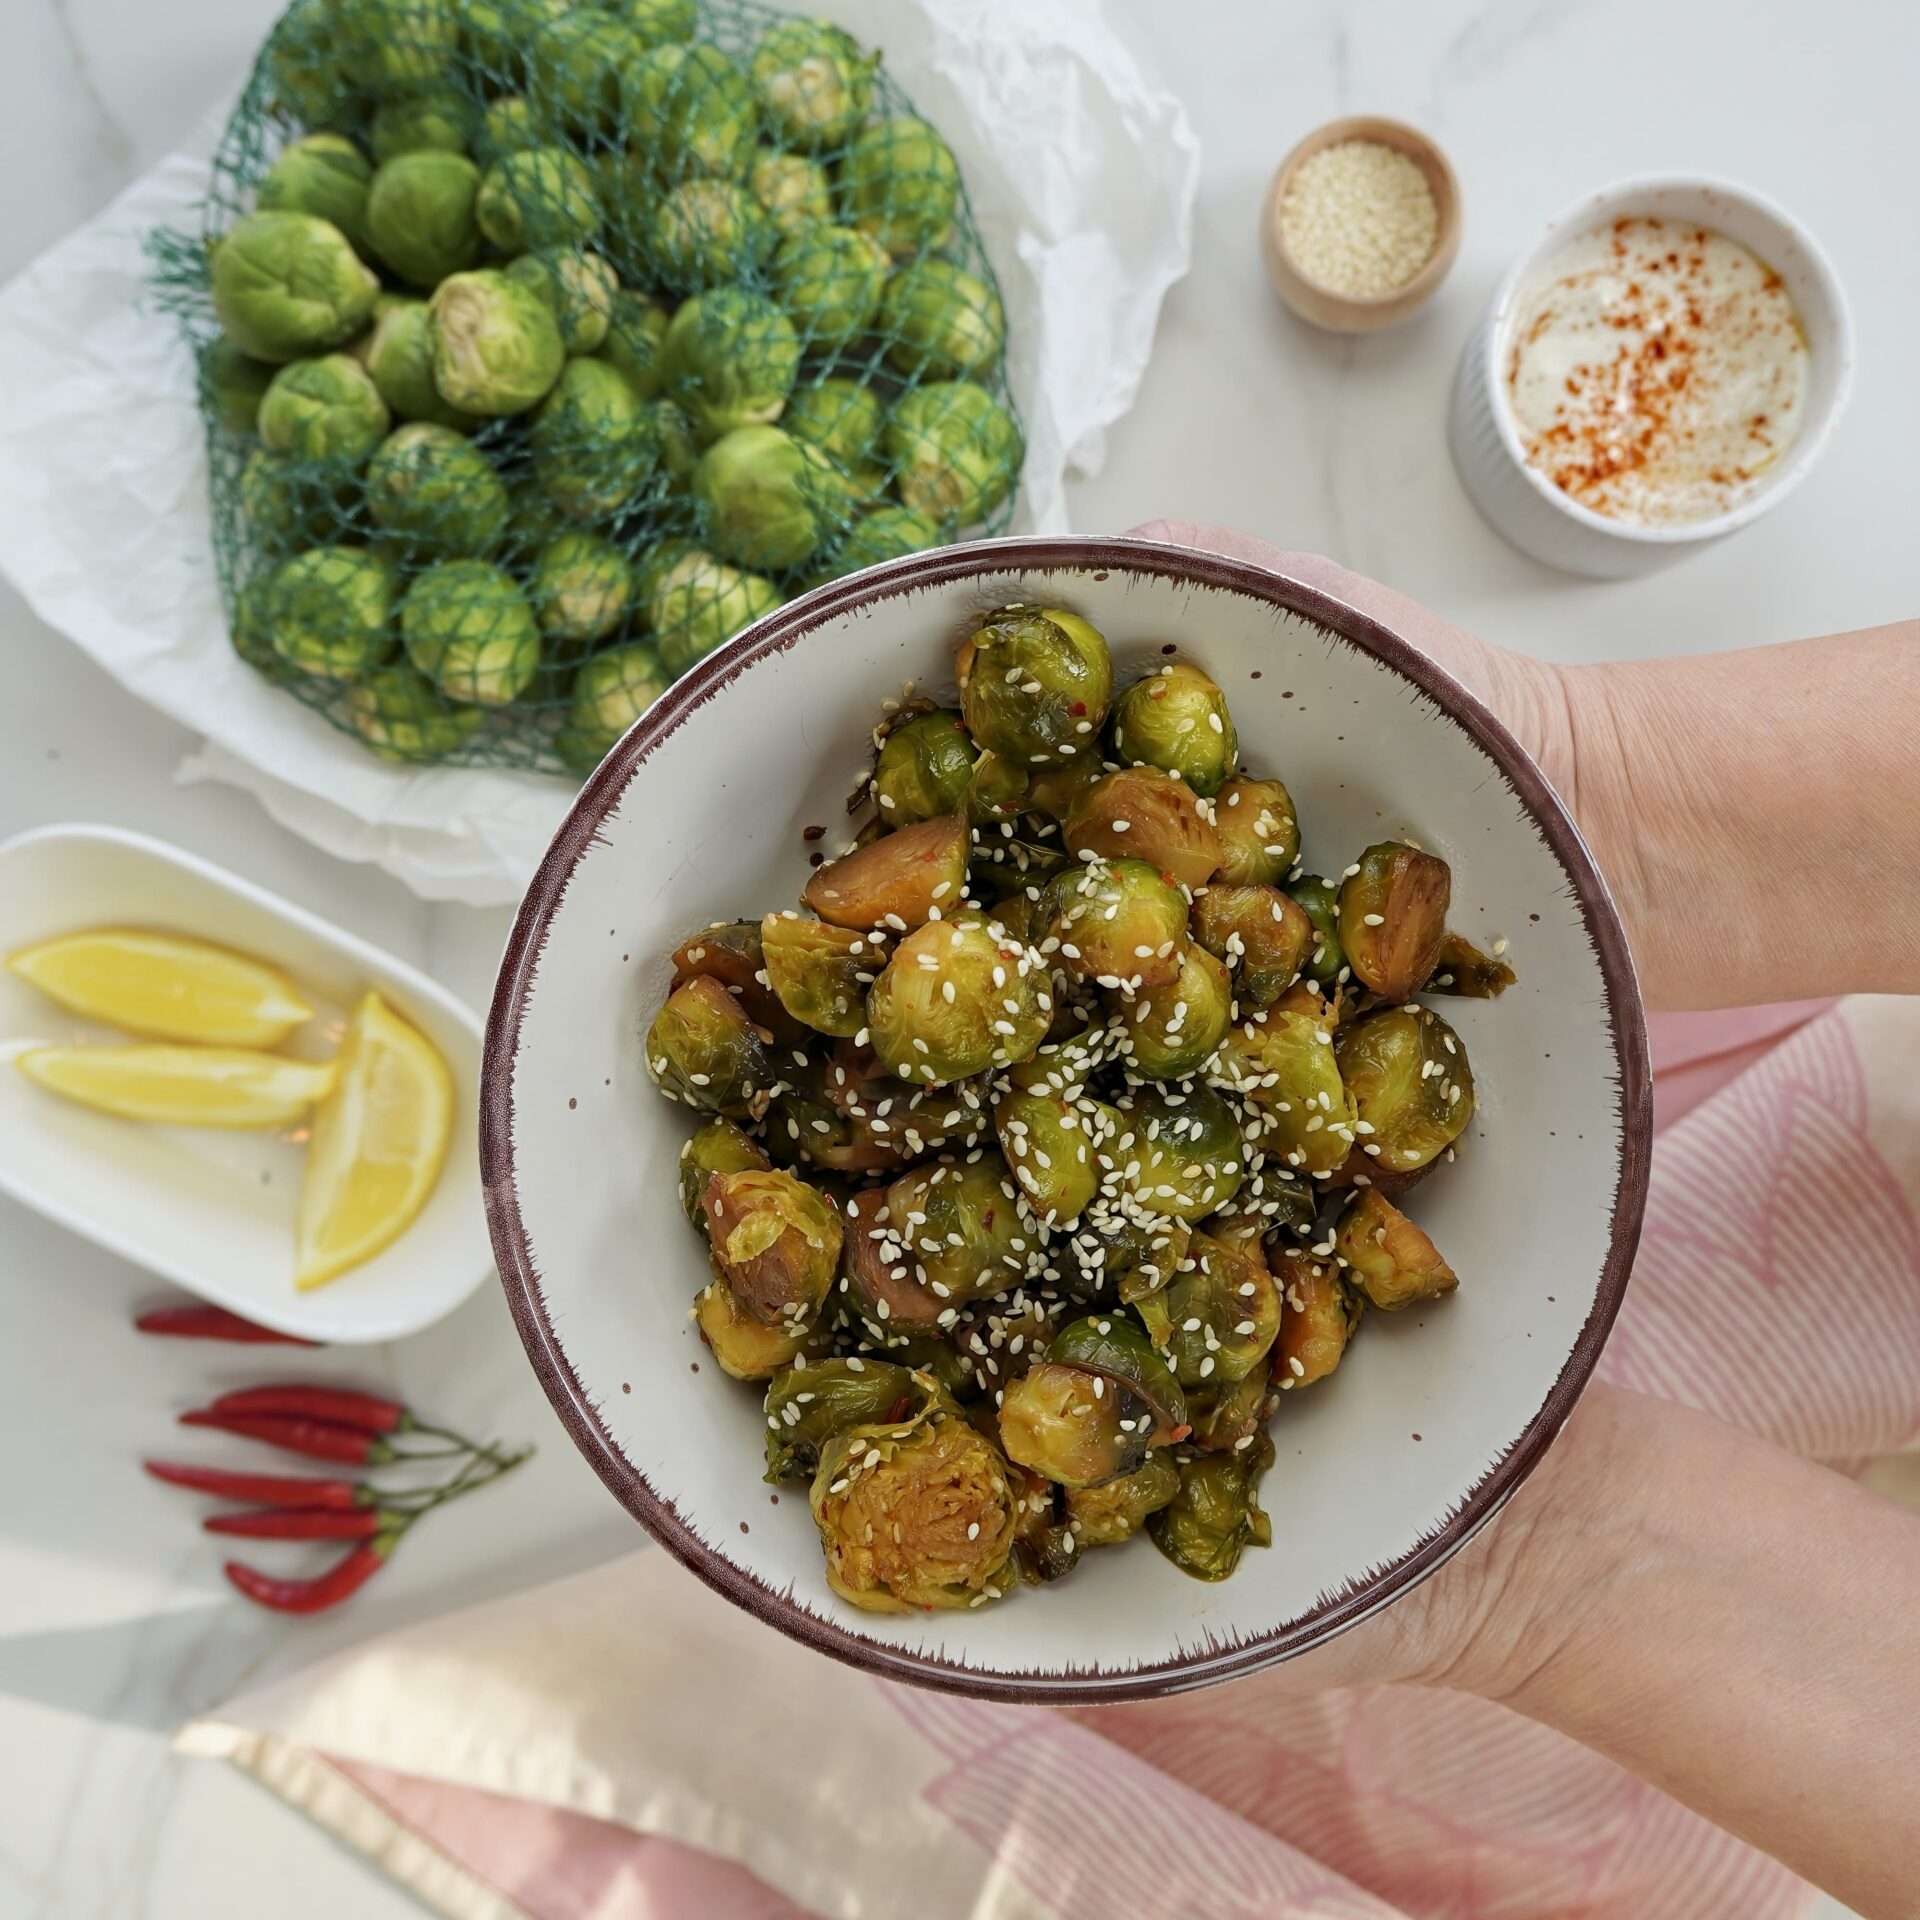 Brussels sprouts on a plate. On top, there are sesame seeds. On the right side is yogurt dip, and on the left, raw Brussels sprouts are in a net bag.